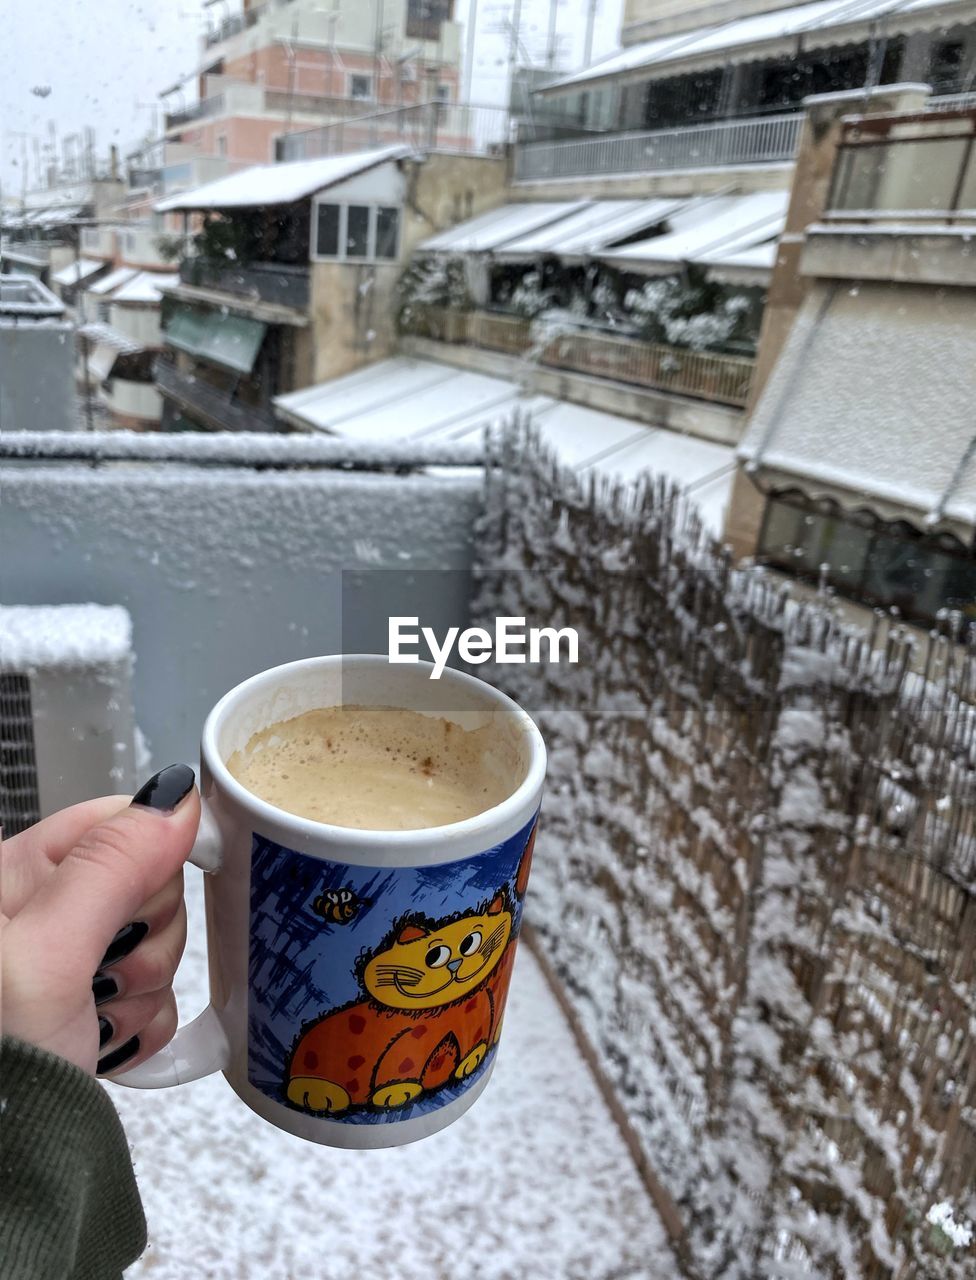 hand, cup, snow, mug, one person, drink, food and drink, coffee, cold temperature, holding, architecture, winter, coffee cup, city, hot drink, refreshment, building exterior, built structure, adult, lifestyles, frozen, day, personal perspective, food, building, tea, outdoors, leisure activity, nature, freshness, street, women